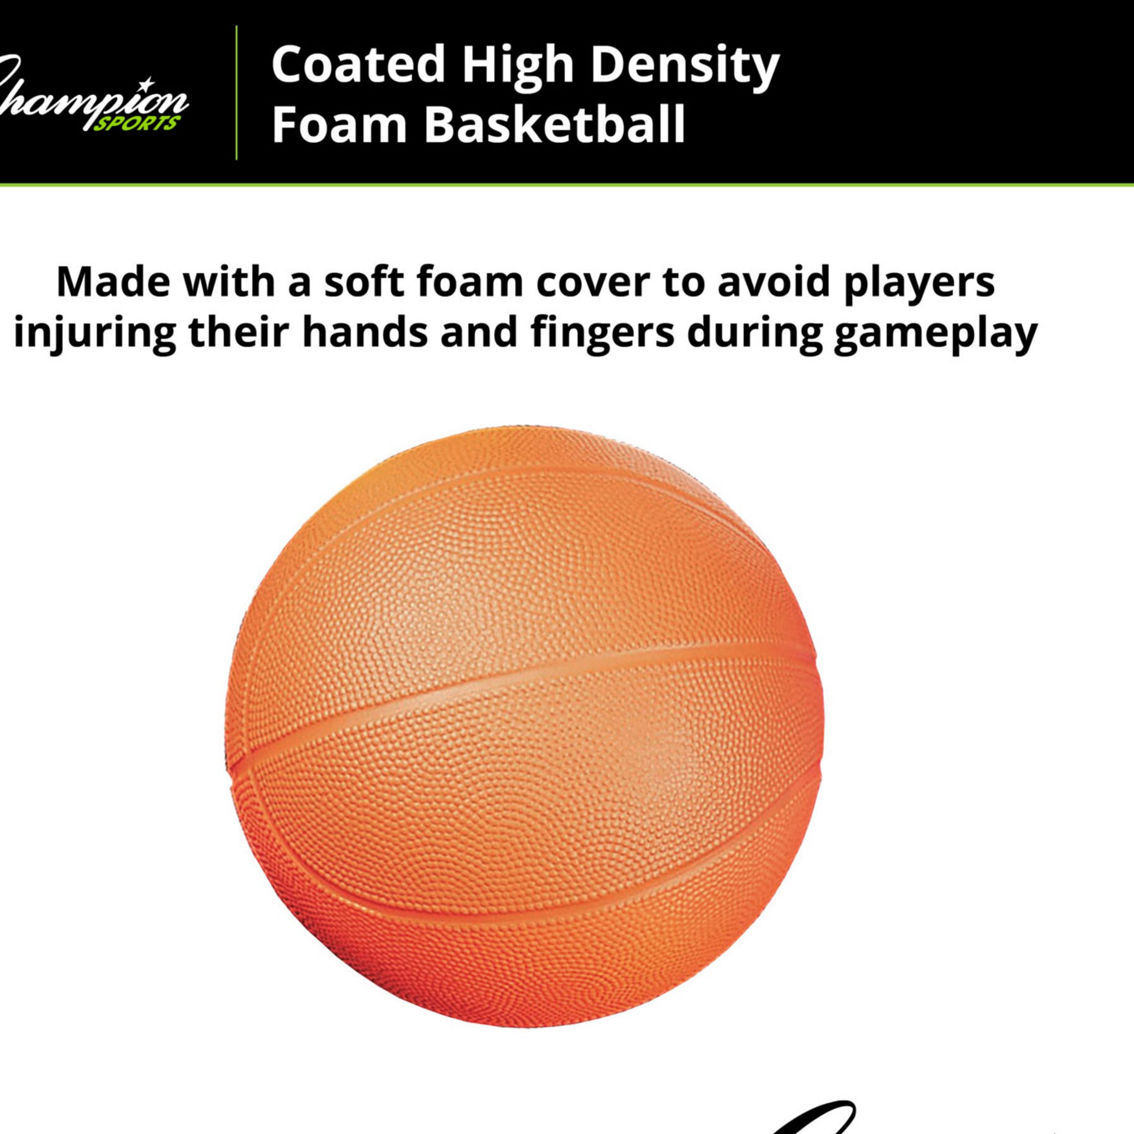 Champion Sports Coated High Density Foam Basketball, Size 3, Pack of 2 - Image 3 of 5